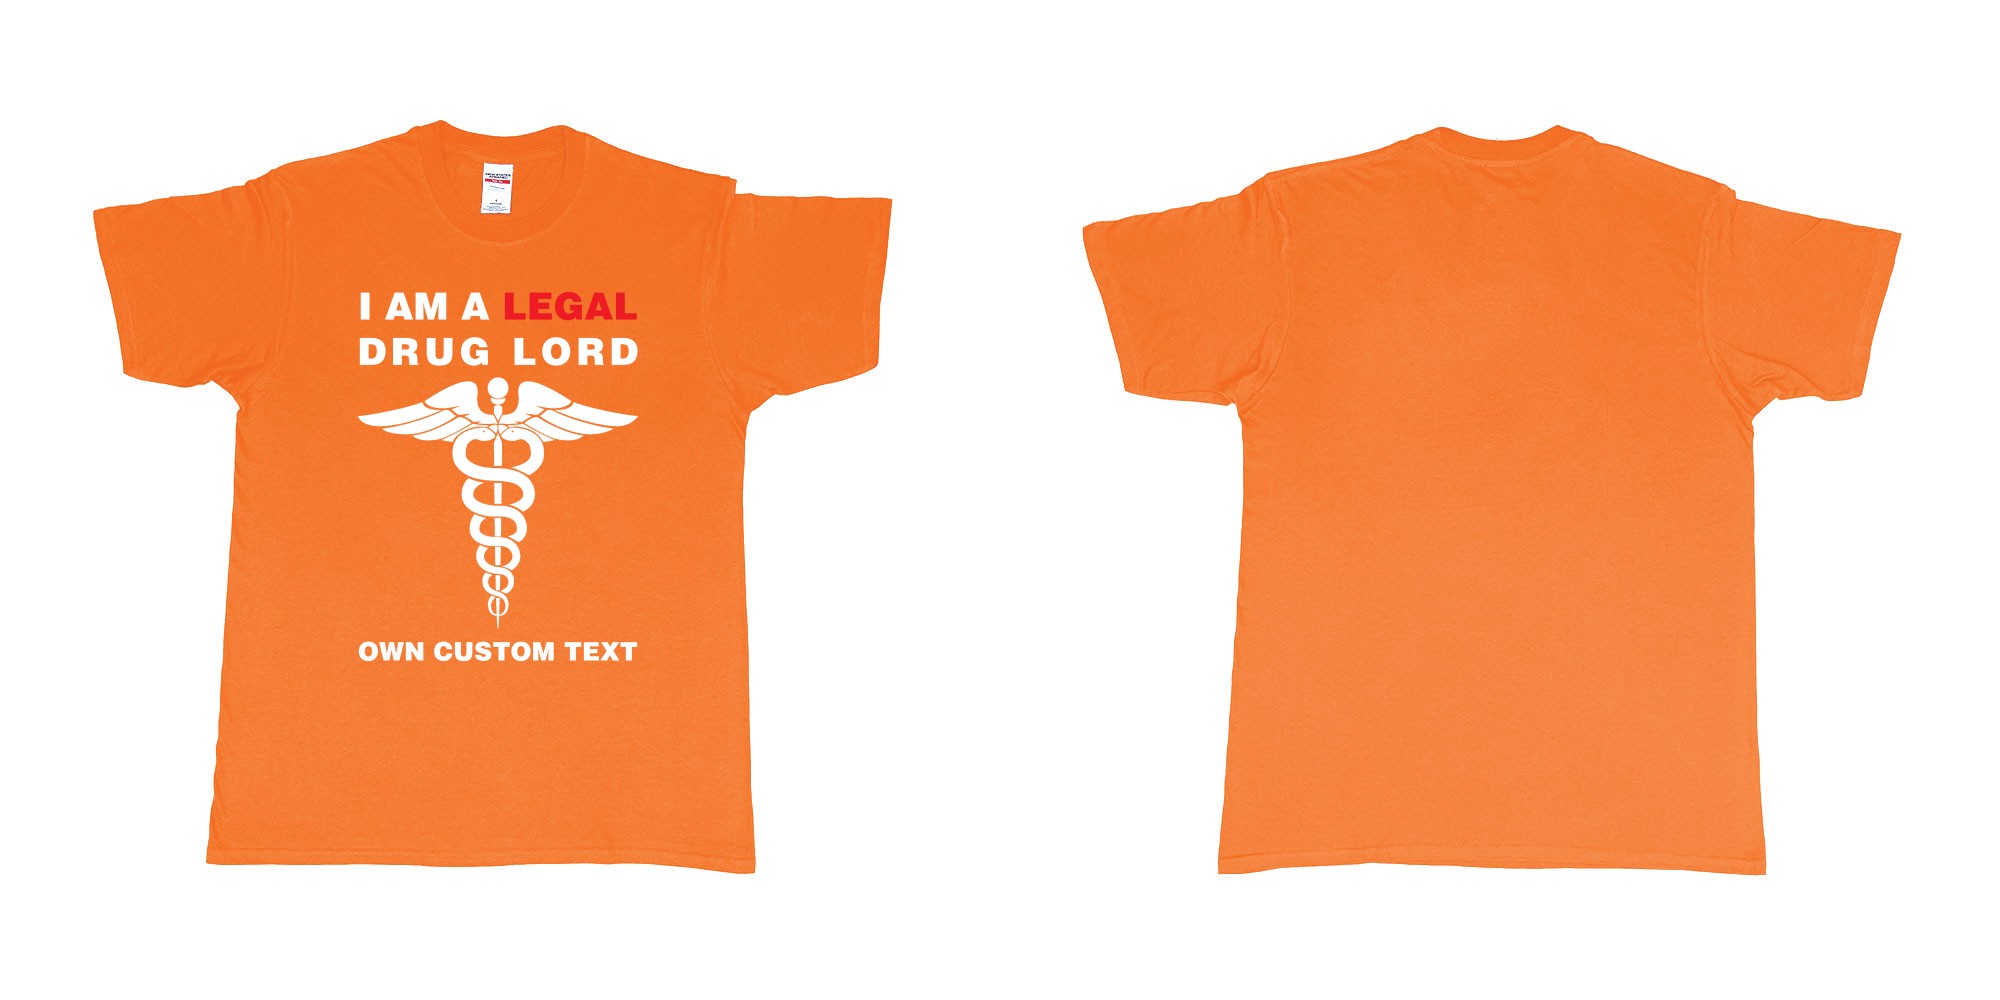 Custom tshirt design legal drug lord in fabric color orange choice your own text made in Bali by The Pirate Way